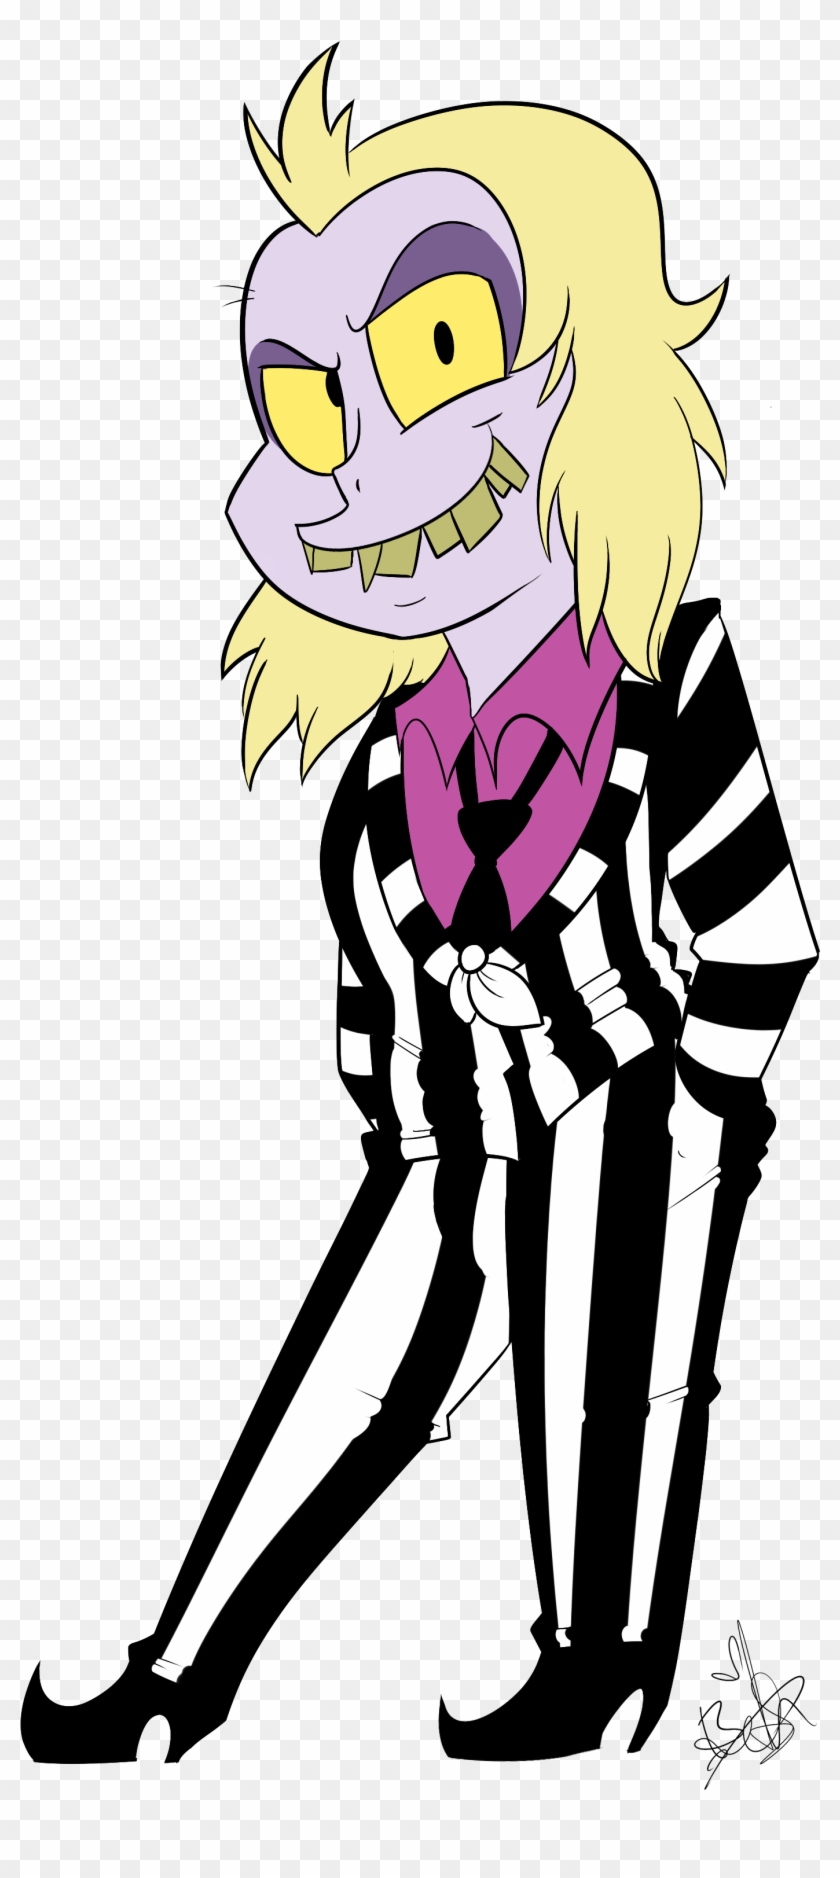 Beetlejuice By Befishproductions Beetlejuice By Befishproductions - Cartoon Clipart #3522818